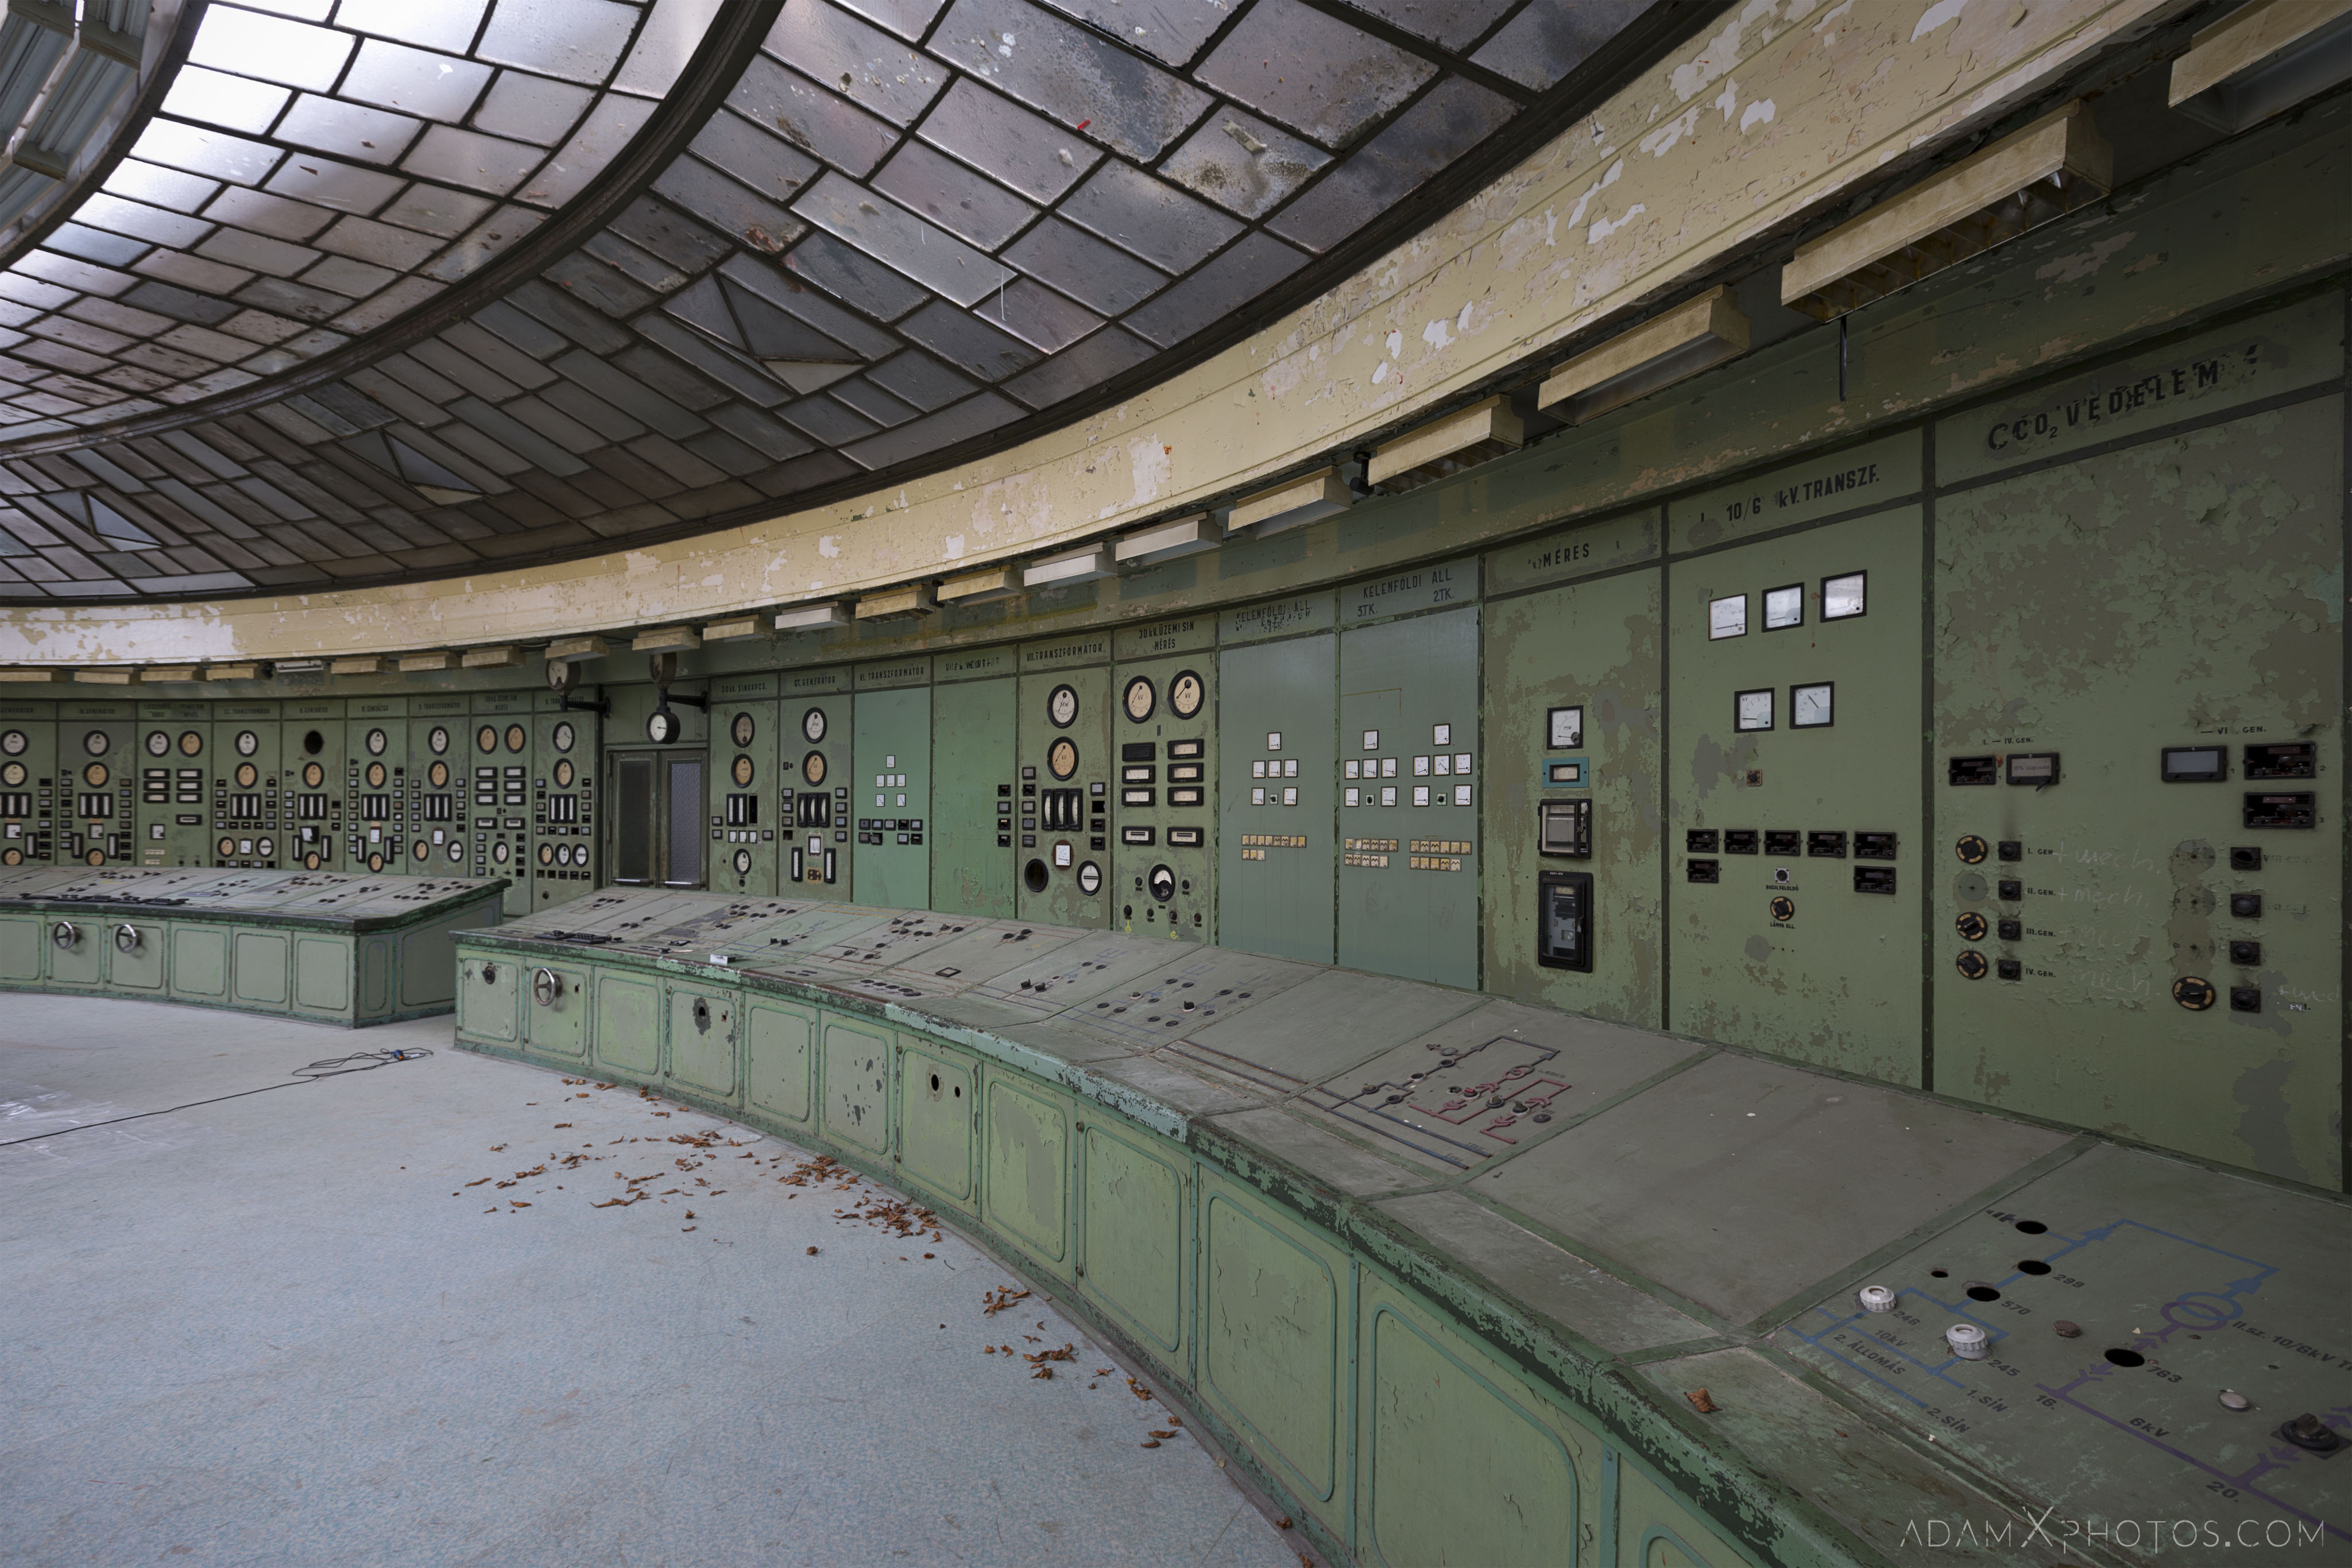 Kelenföld Control Room Art Deco Power Station Green controls panels switches udapest hungary Adam X Urbex Urban Exploration Access 2018 Abandoned decay ruins lost forgotten derelict location creepy haunting eerie